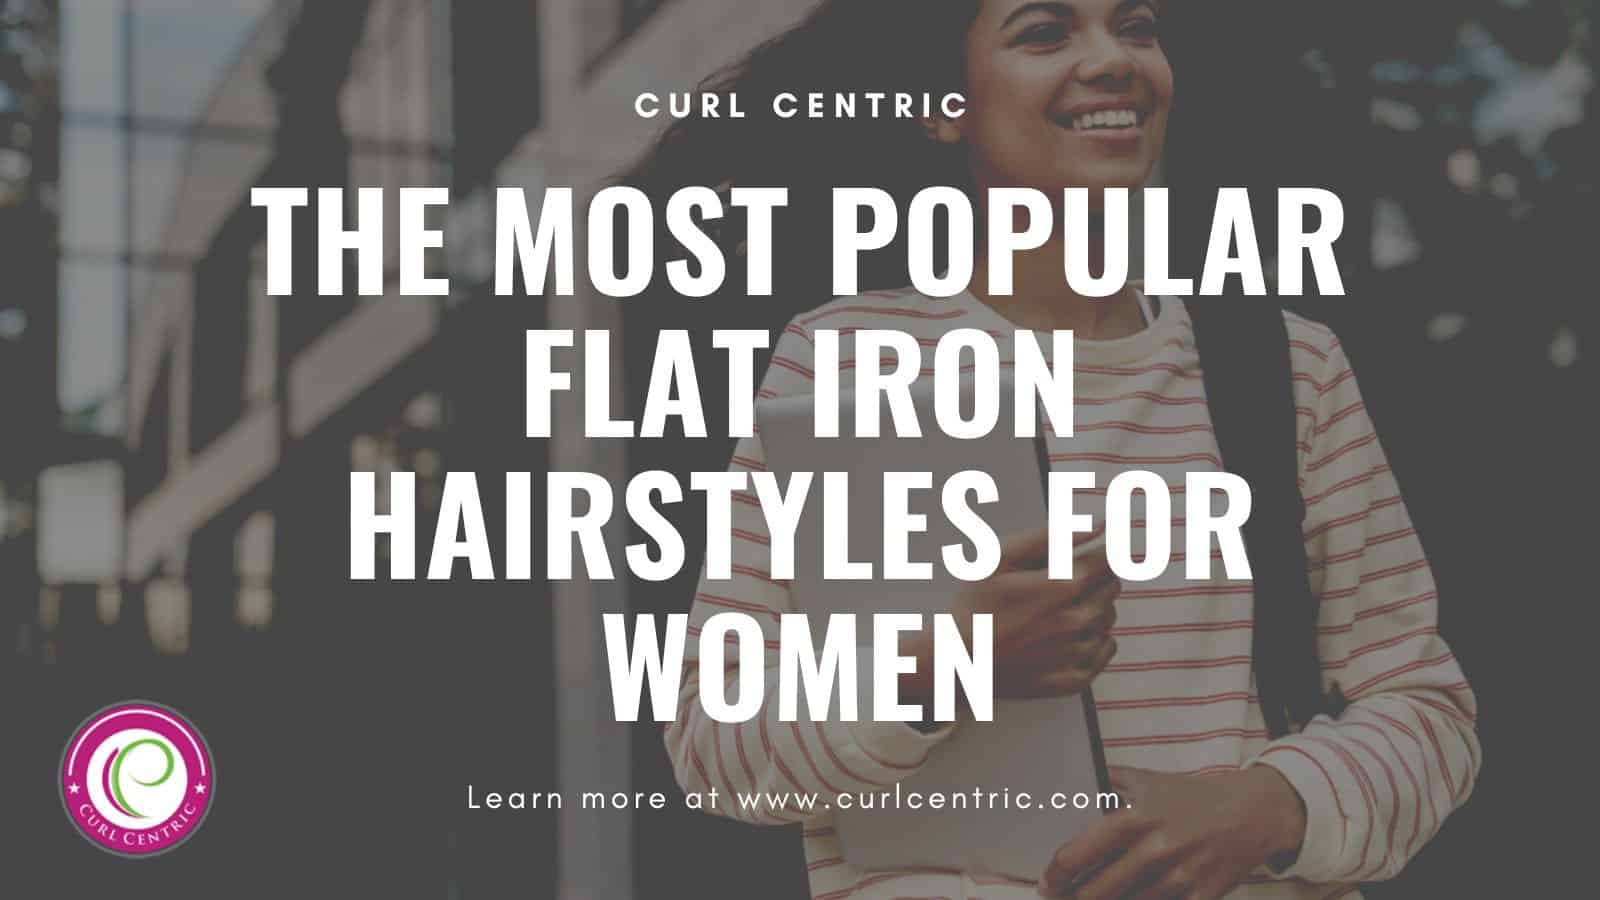 A title graphic for an article on natural flat iron hairstyles for ladies that like flat ironing their curly texture.